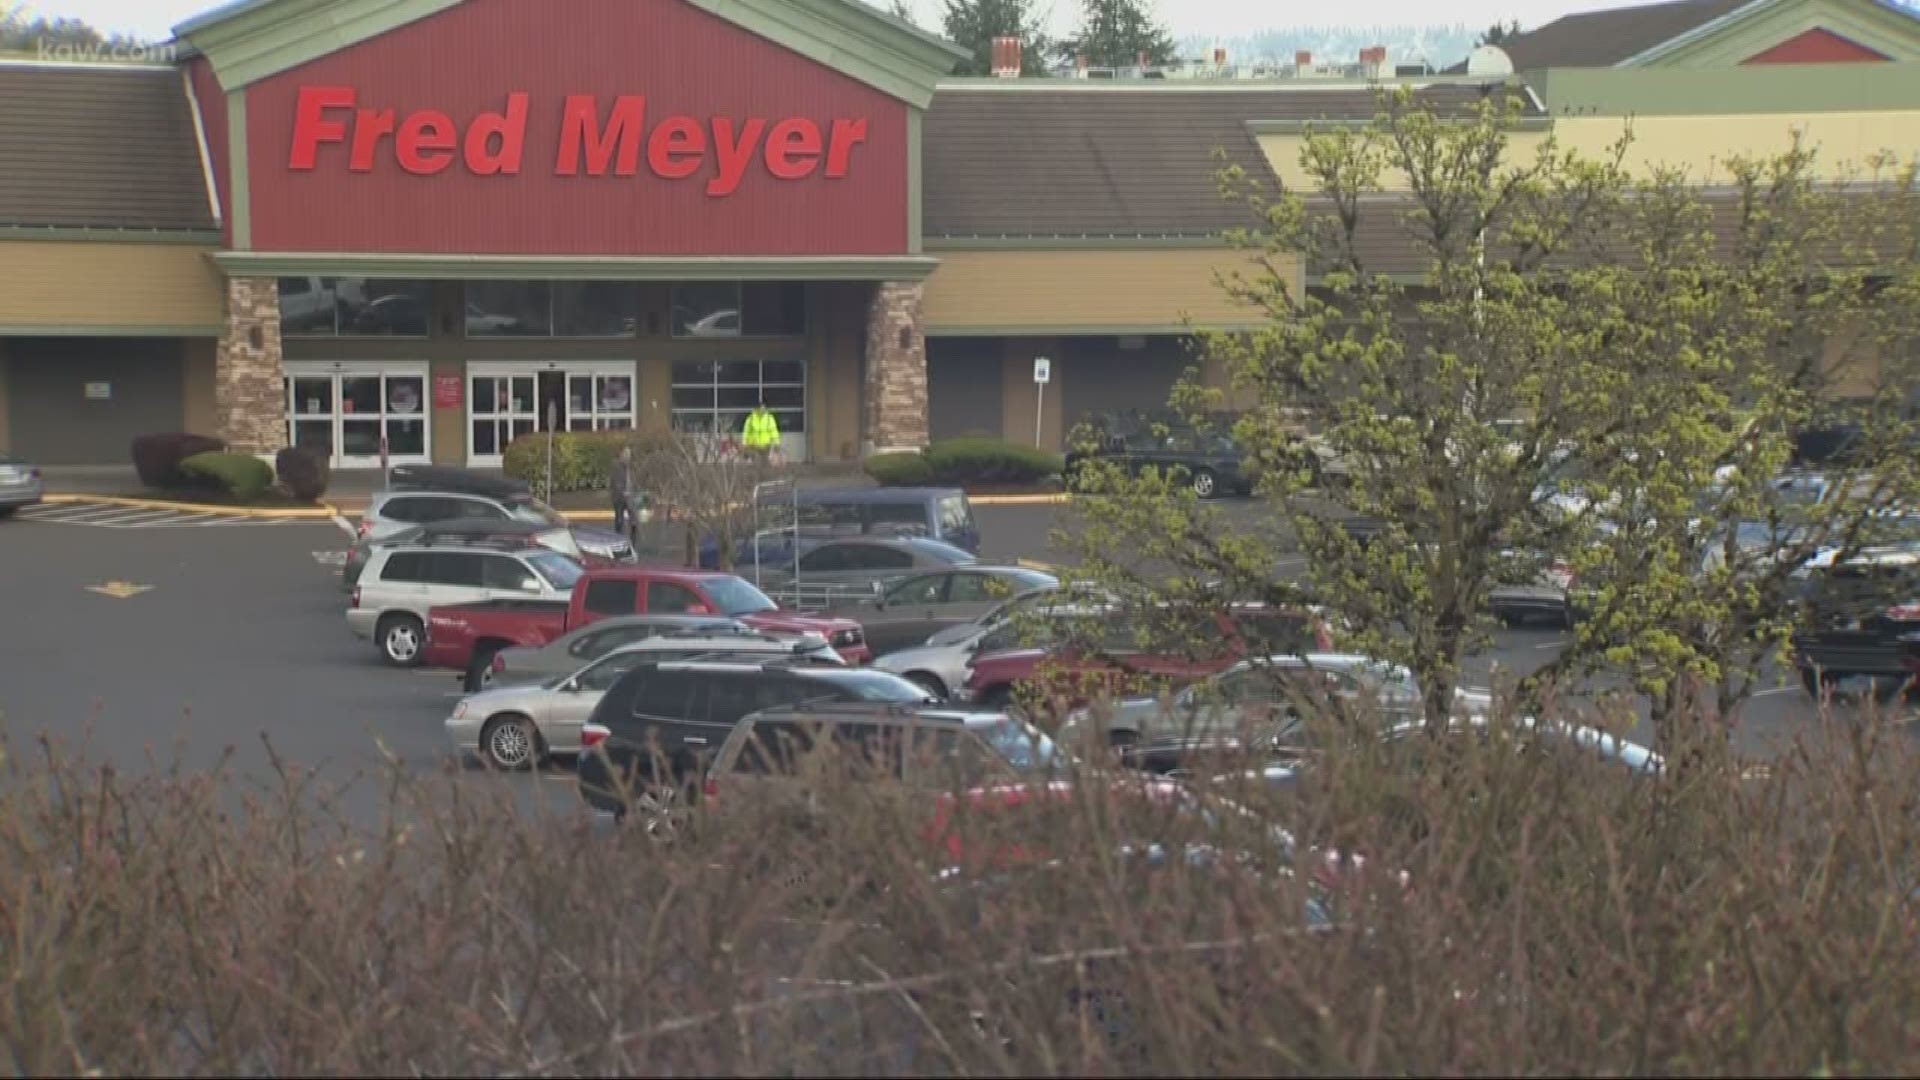 A boycott of Fred Meyer stores in Oregon and Washington is over after UFCW Local 555, the grocery workers' union, reached a tentative agreement with employers.